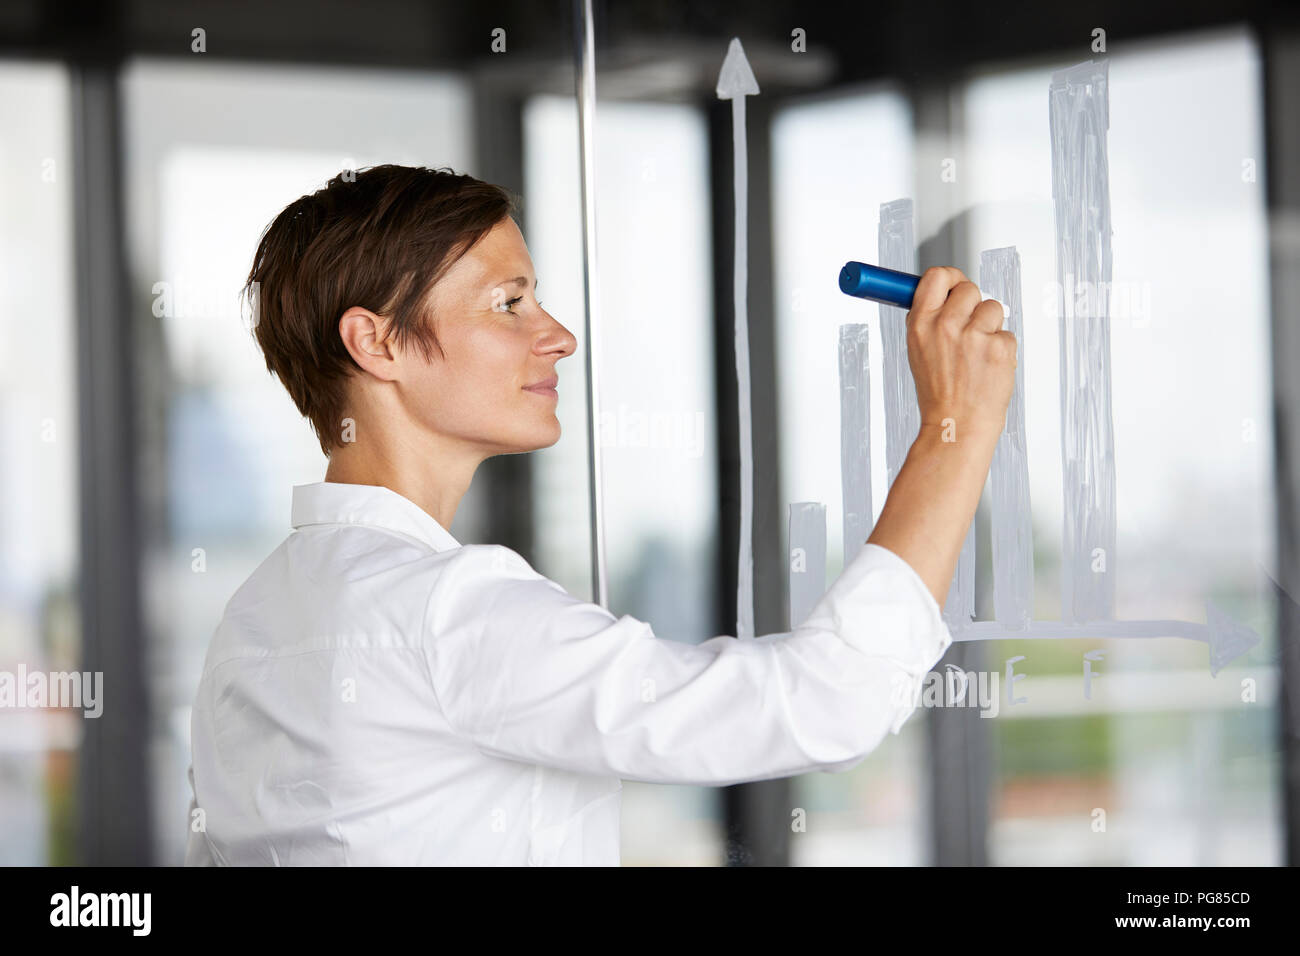 Businesswoman drawing bar chart at glass pane in office Stock Photo